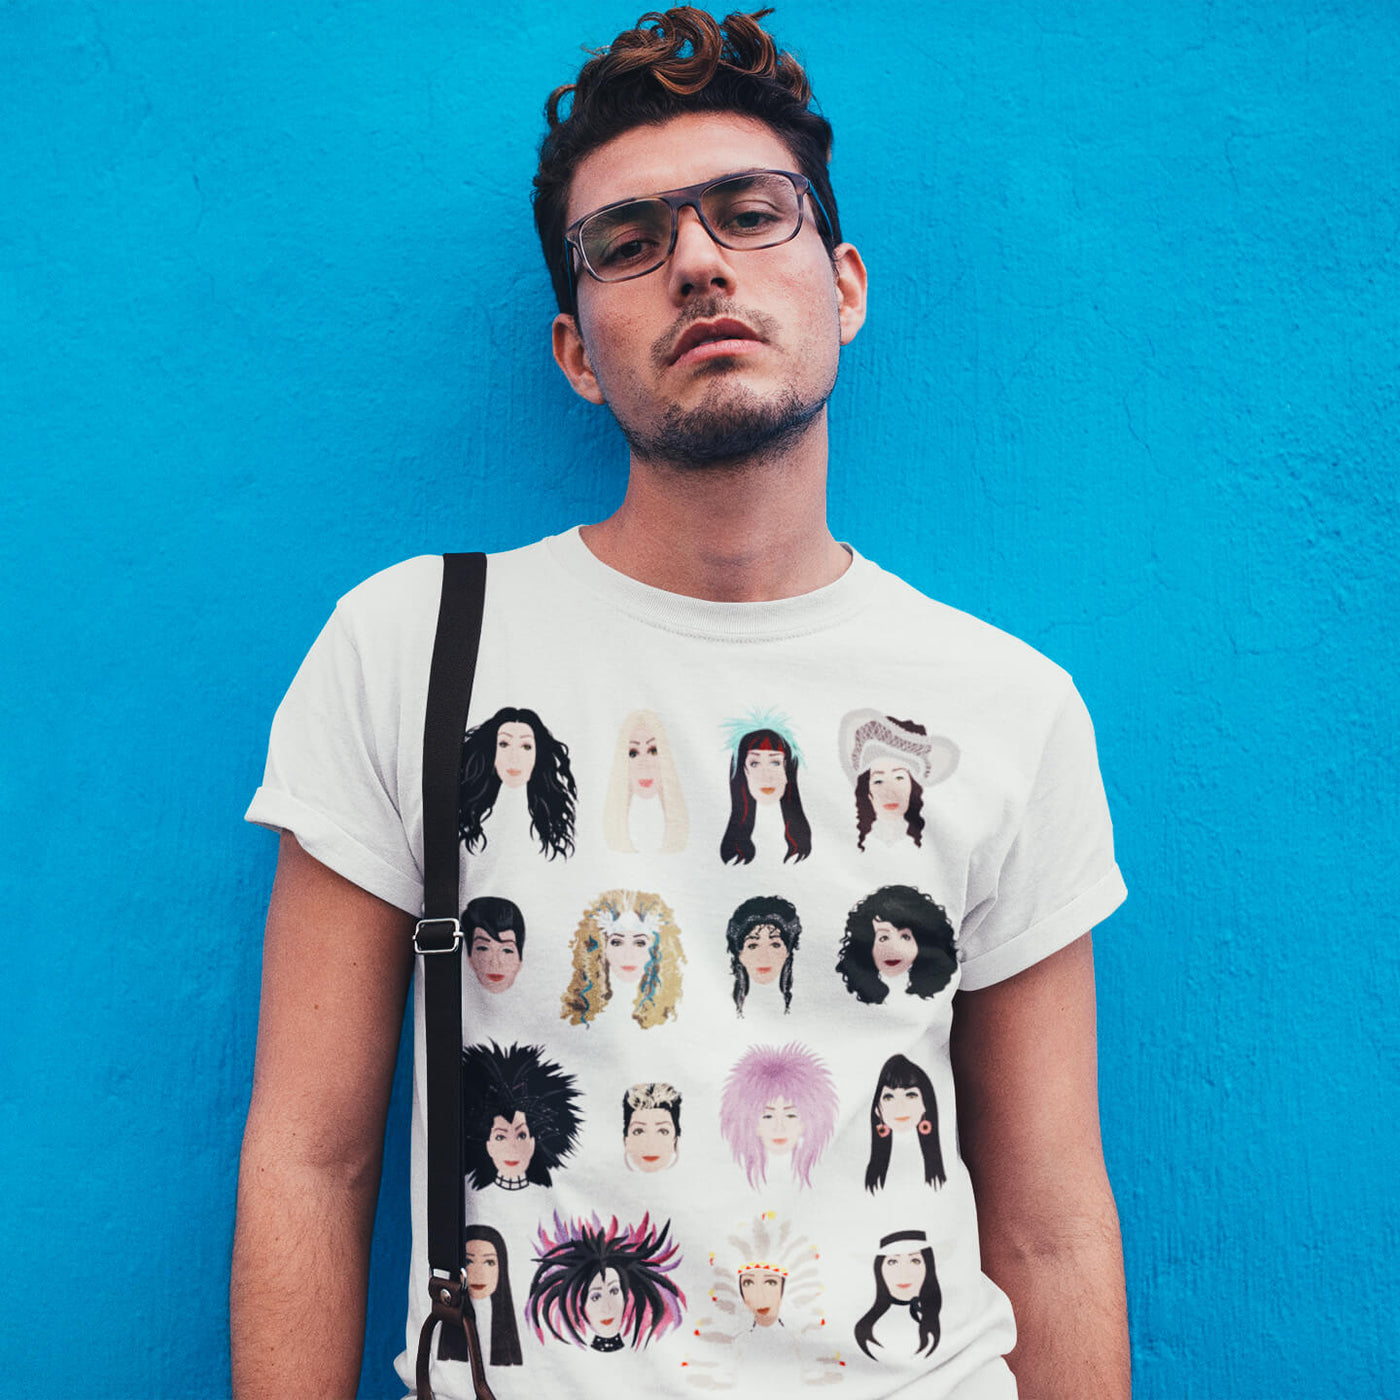 Hipster guy wearing suspenders and Gllamazon's Turn Back Time Cher T-Shirt